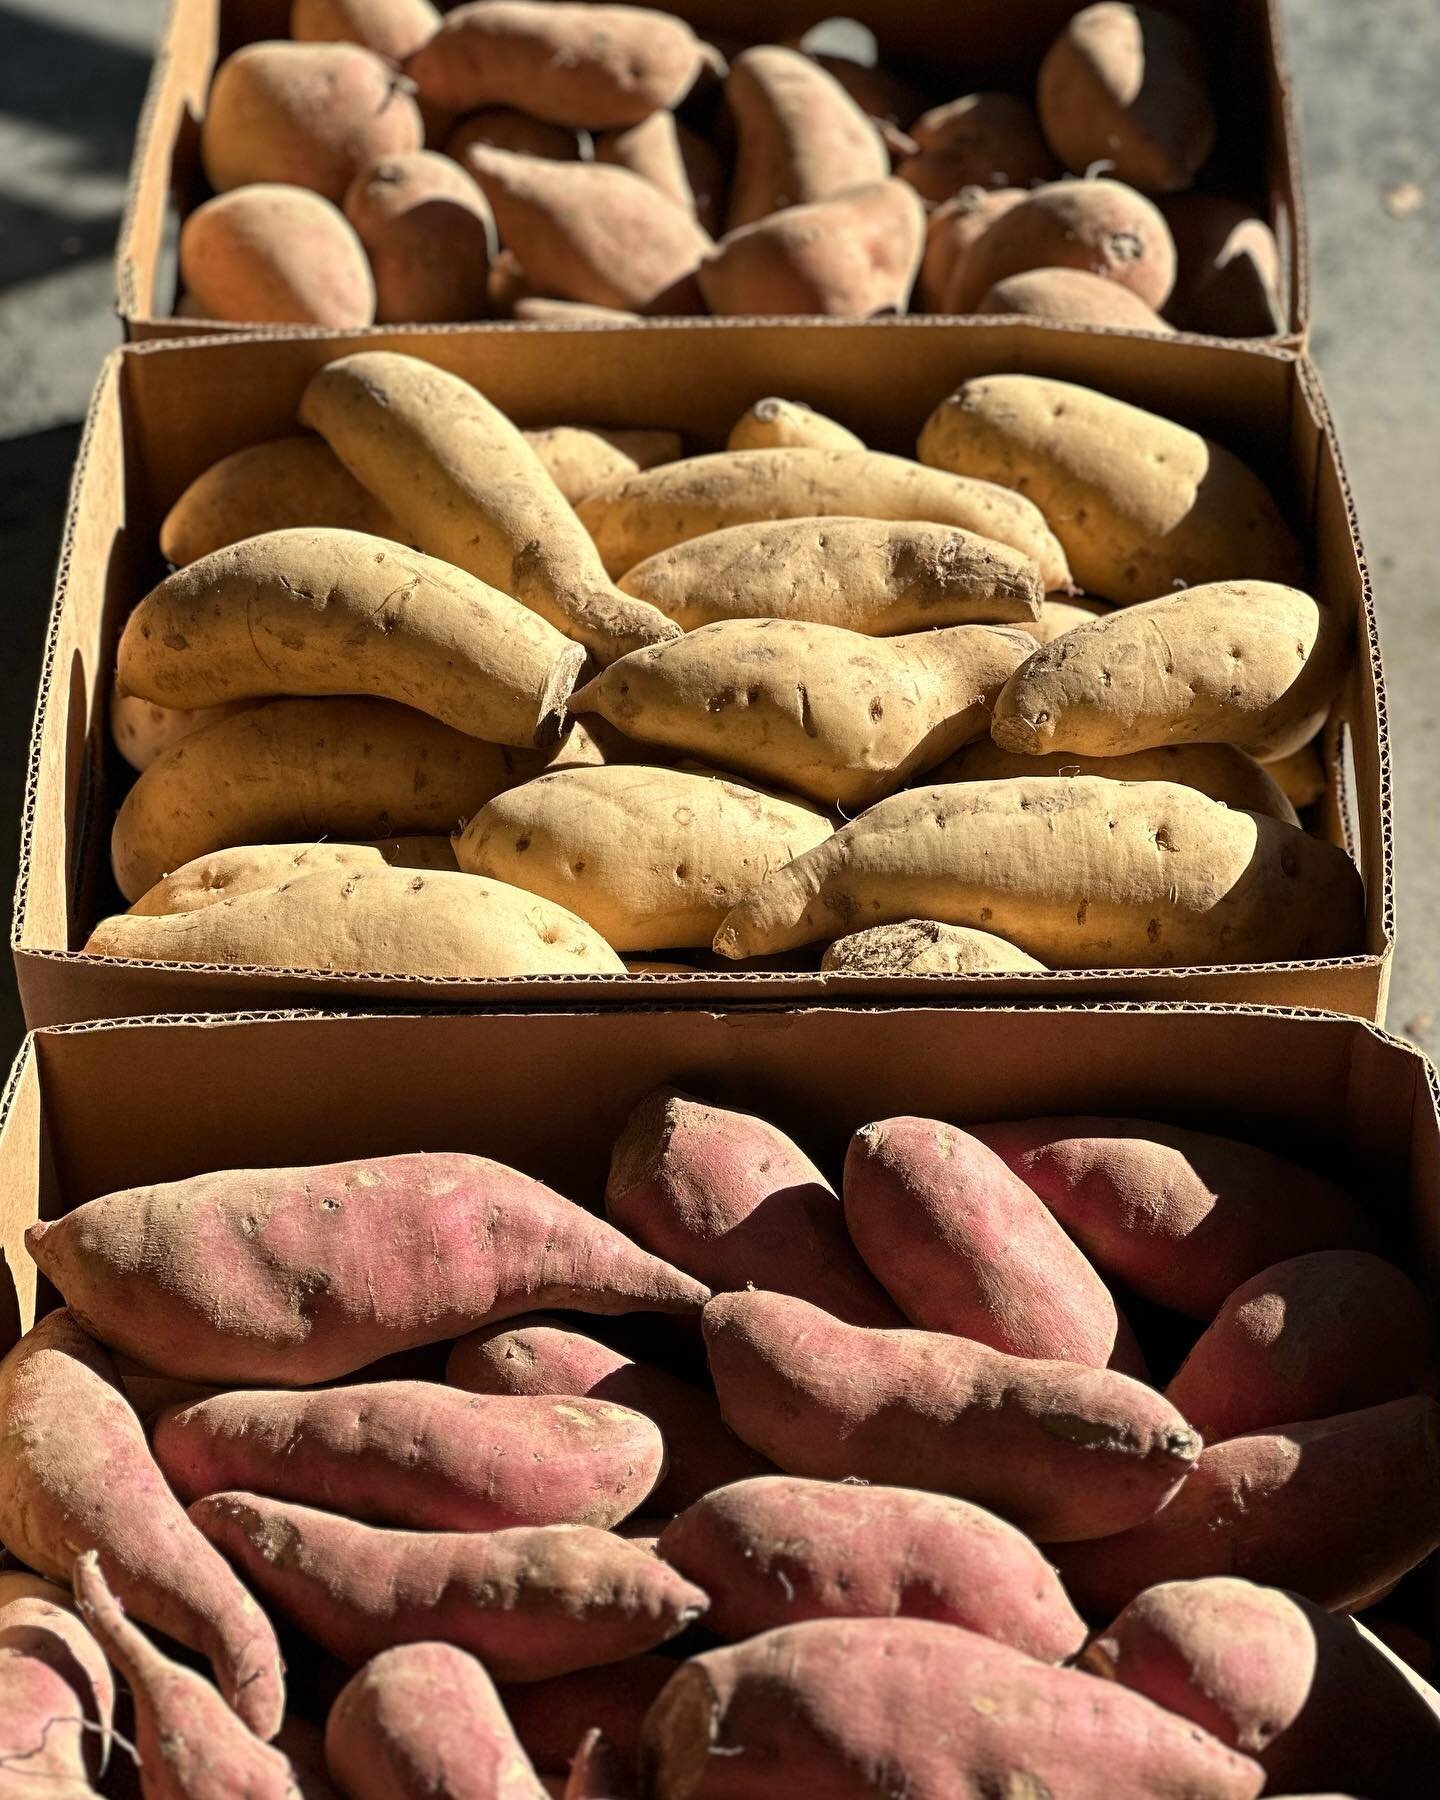 🍠 Why was the potato so quiet? 🤫

🥔 &hellip;Because it was a medi-tater! 🧘&zwj;♀️

We have beautiful sweet potatoes in the market!

🔴 Covington Red - orange-red flesh with very sweet, malty flavor

⚪️ Bonita - white skin and flesh with Russet-li